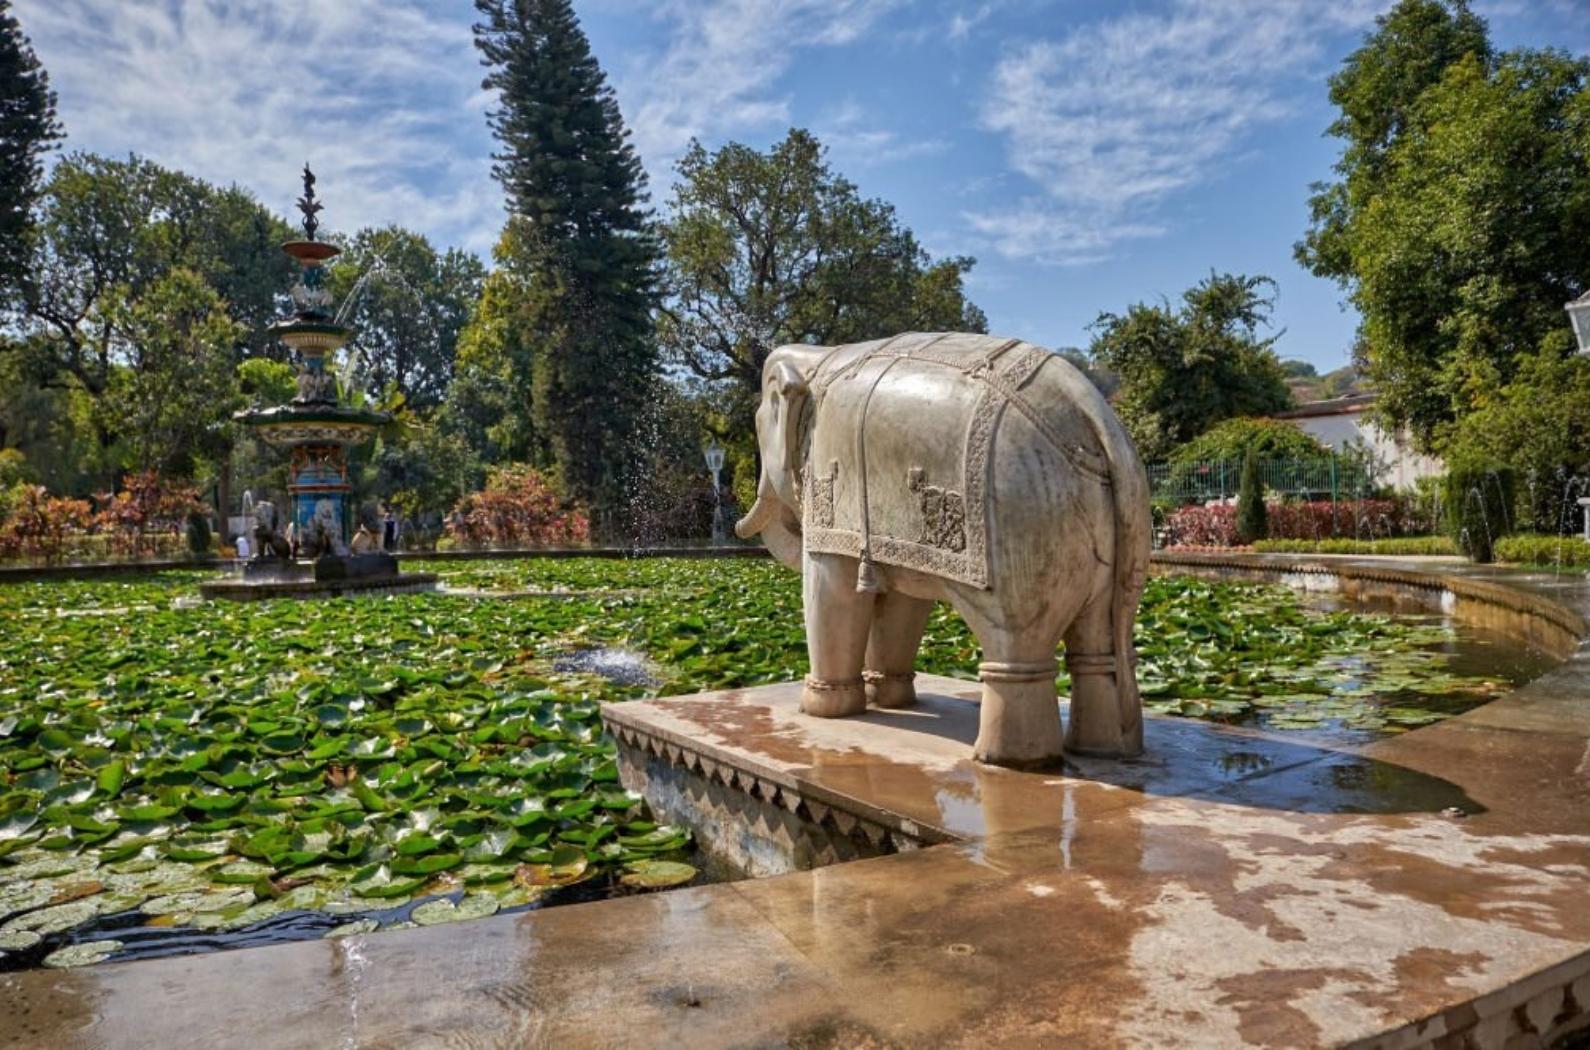 Elephant statue facing into a large fountain. Lilly pads in the water. Blue sky.